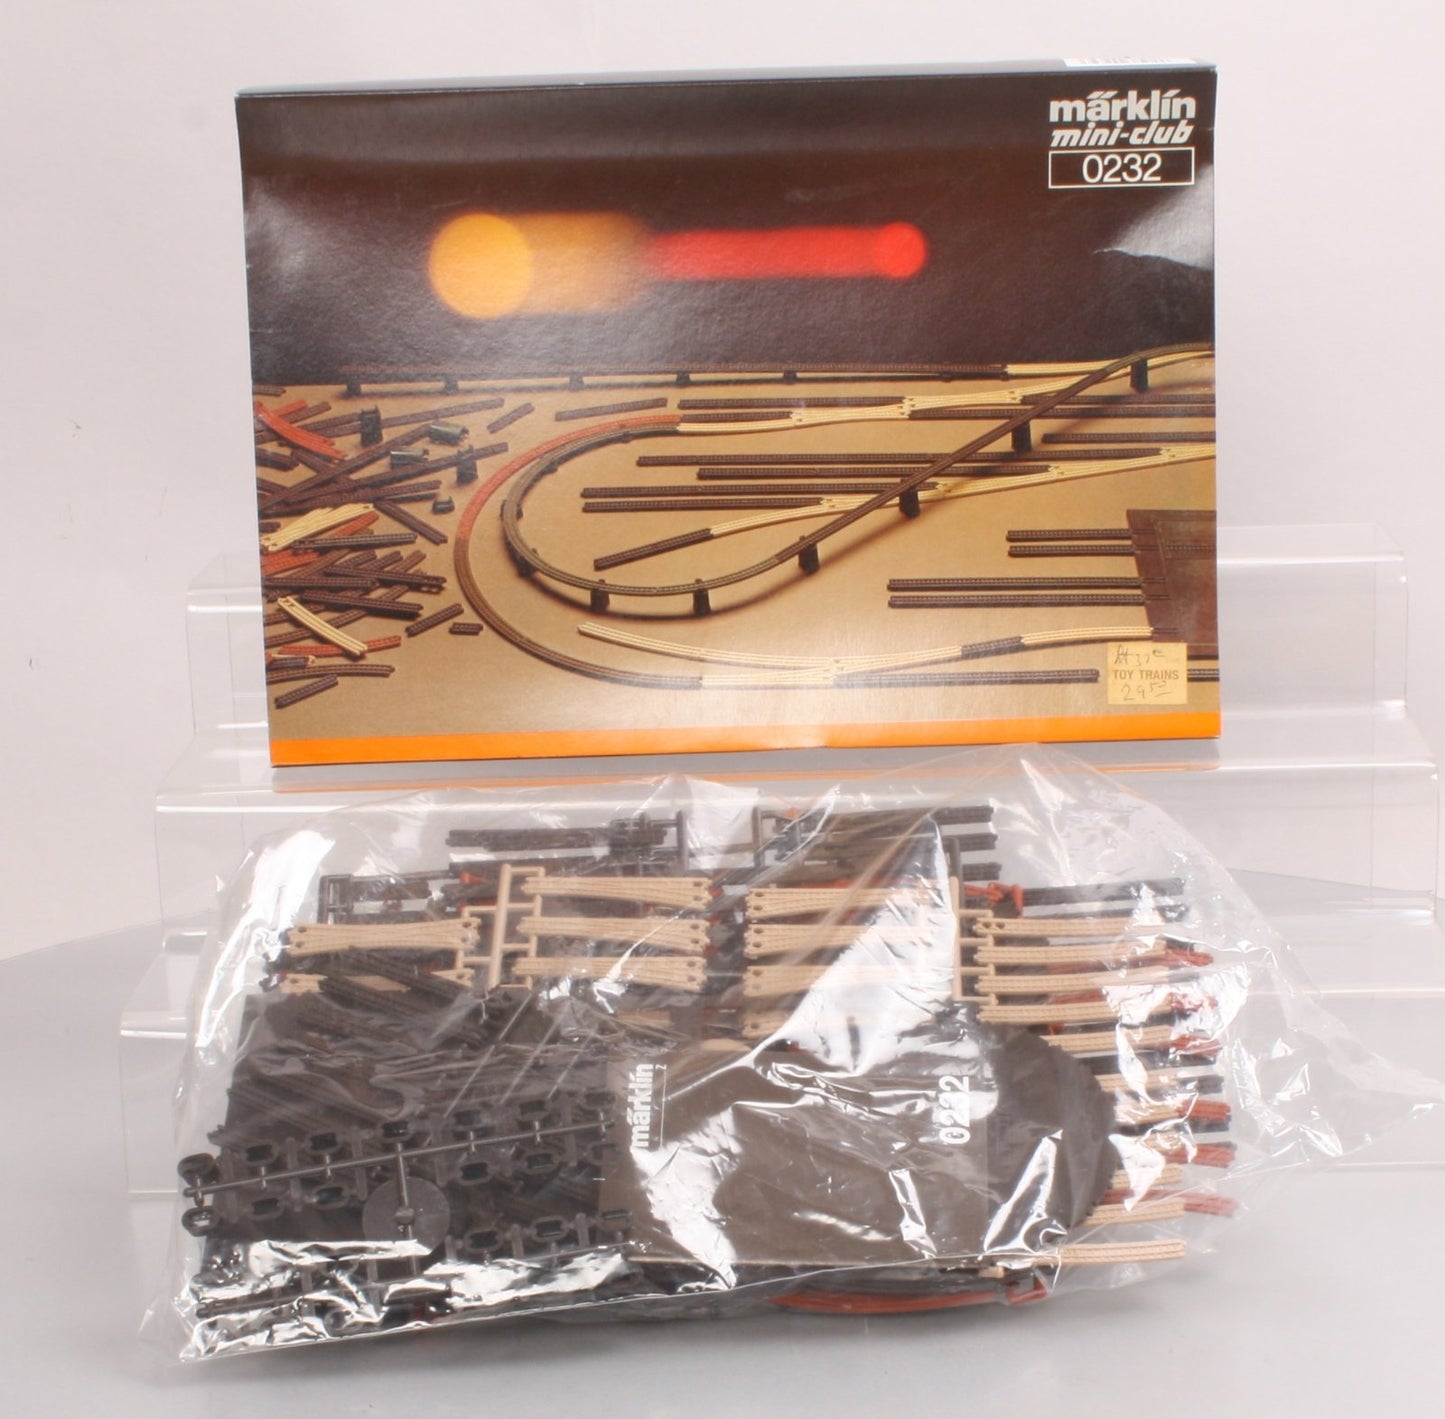 Marklin 0232 Z Scale Track Planning Game